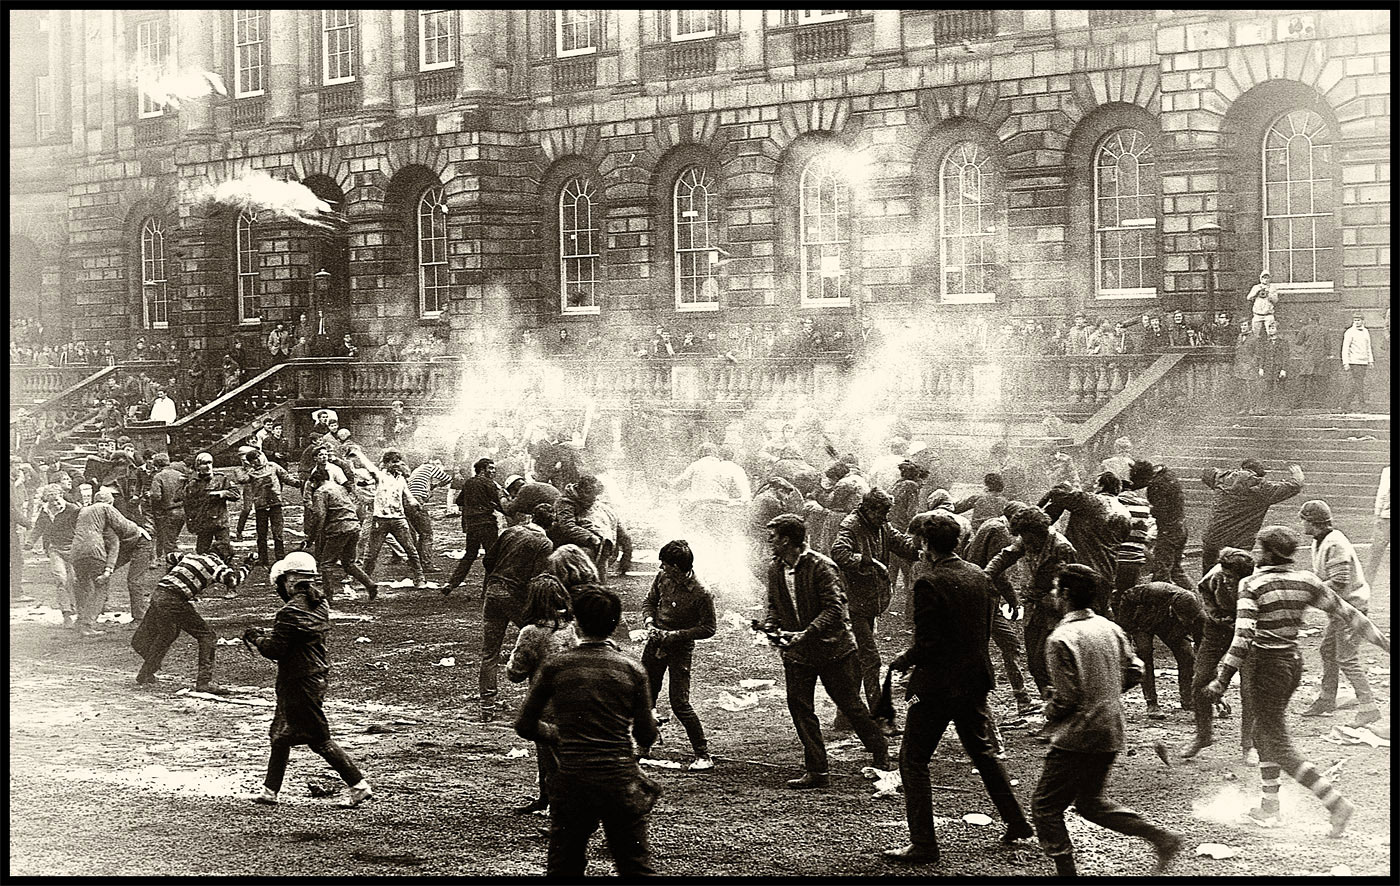 Edinburgh University, Rectorial Battle Day 1963  -  Fighting in the Old Quad